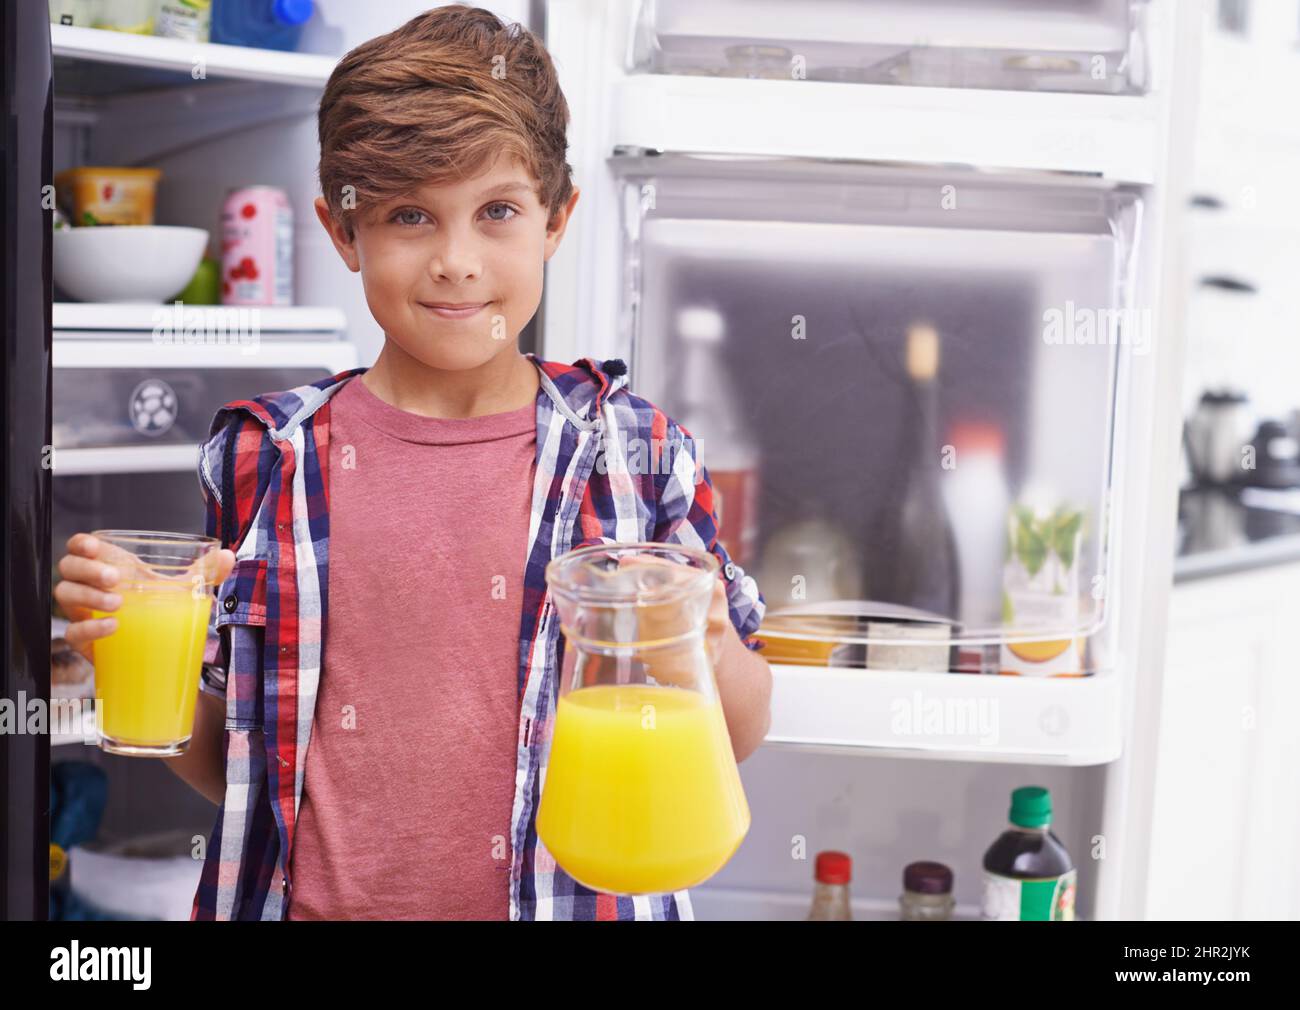 Some goodness to quench the thirst. Shot of a young boy standing in front of the fridge with some orange juice. Stock Photo